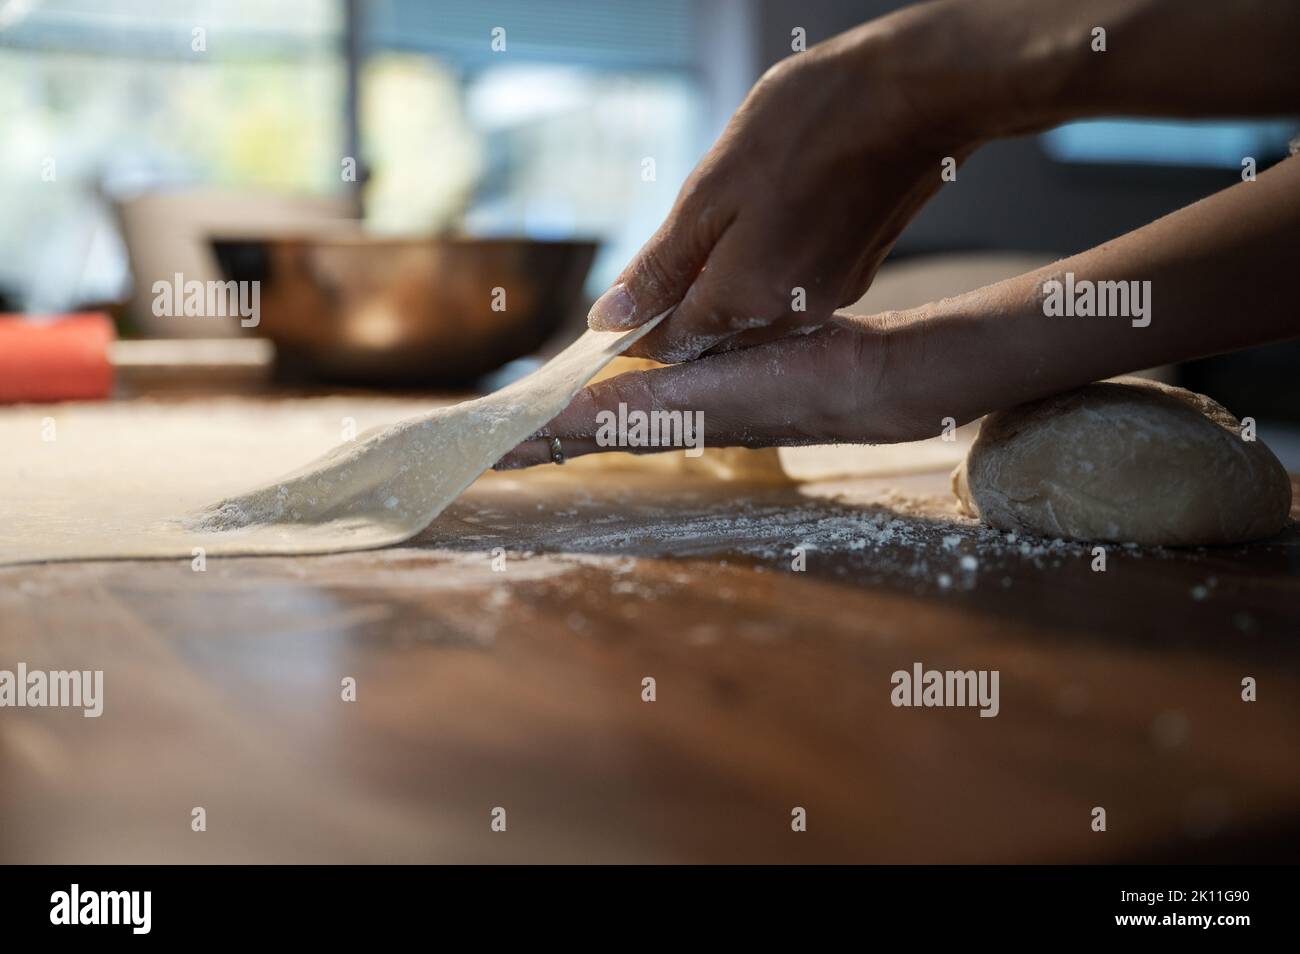 Low angle view of a woman stretching and pulling homemade vegan pastry dough on a domestic flour dusted dining table. Stock Photo